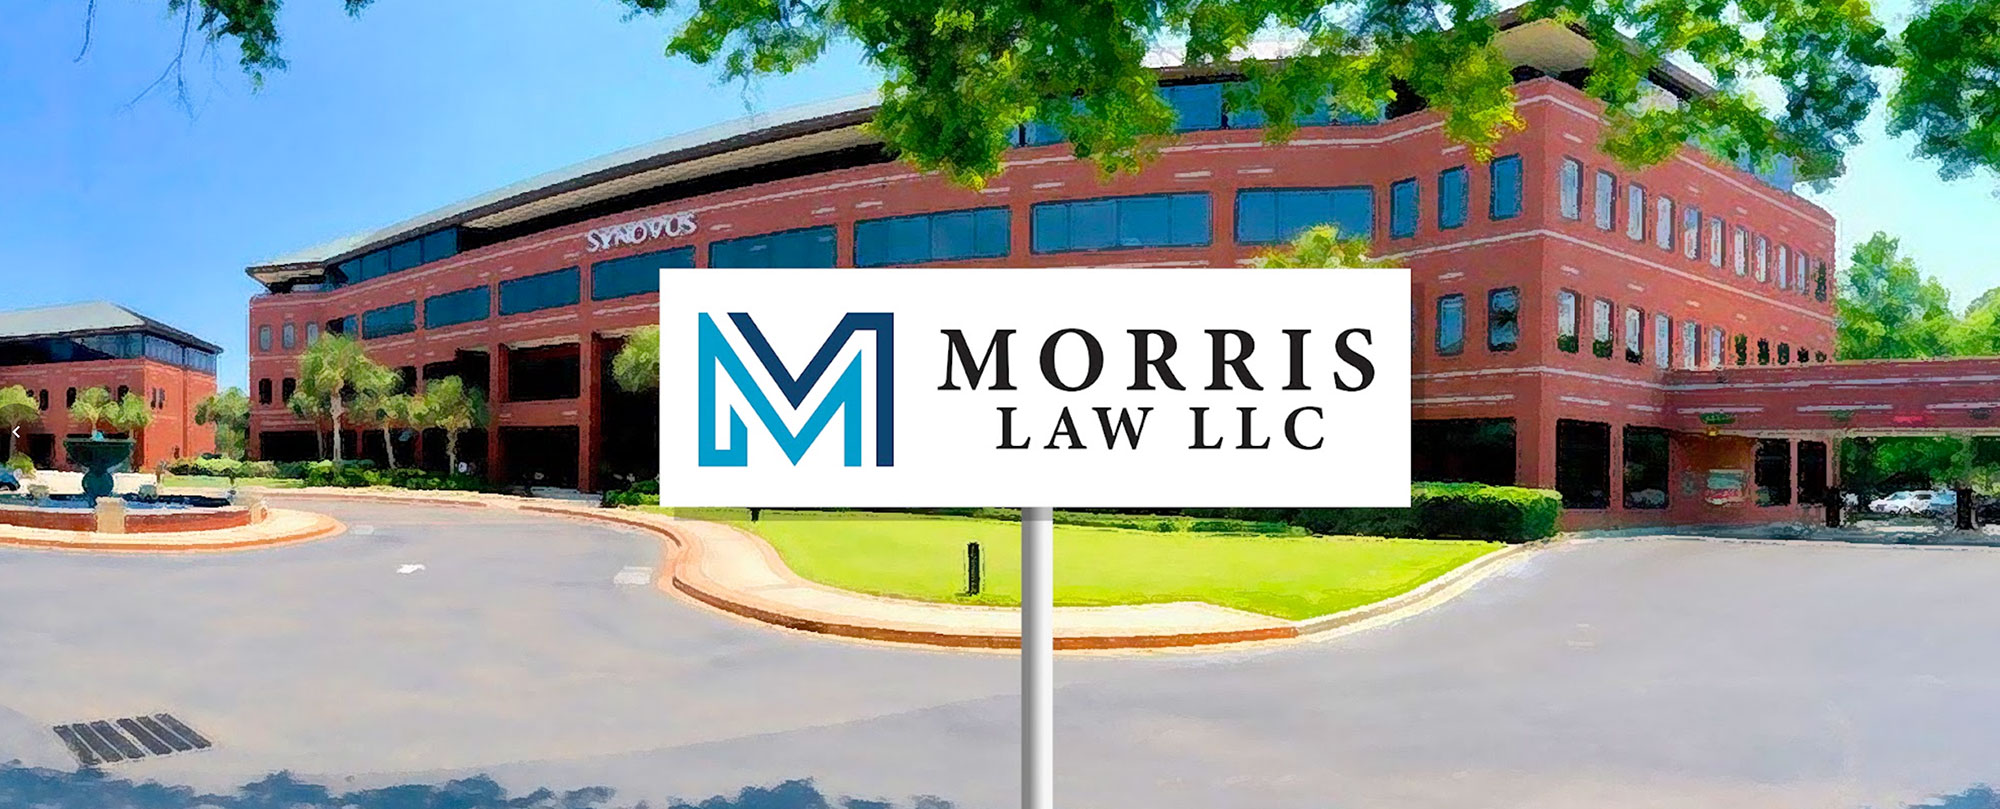 Picture of the Jeff Morris Law Firm building in Myrtle Beach